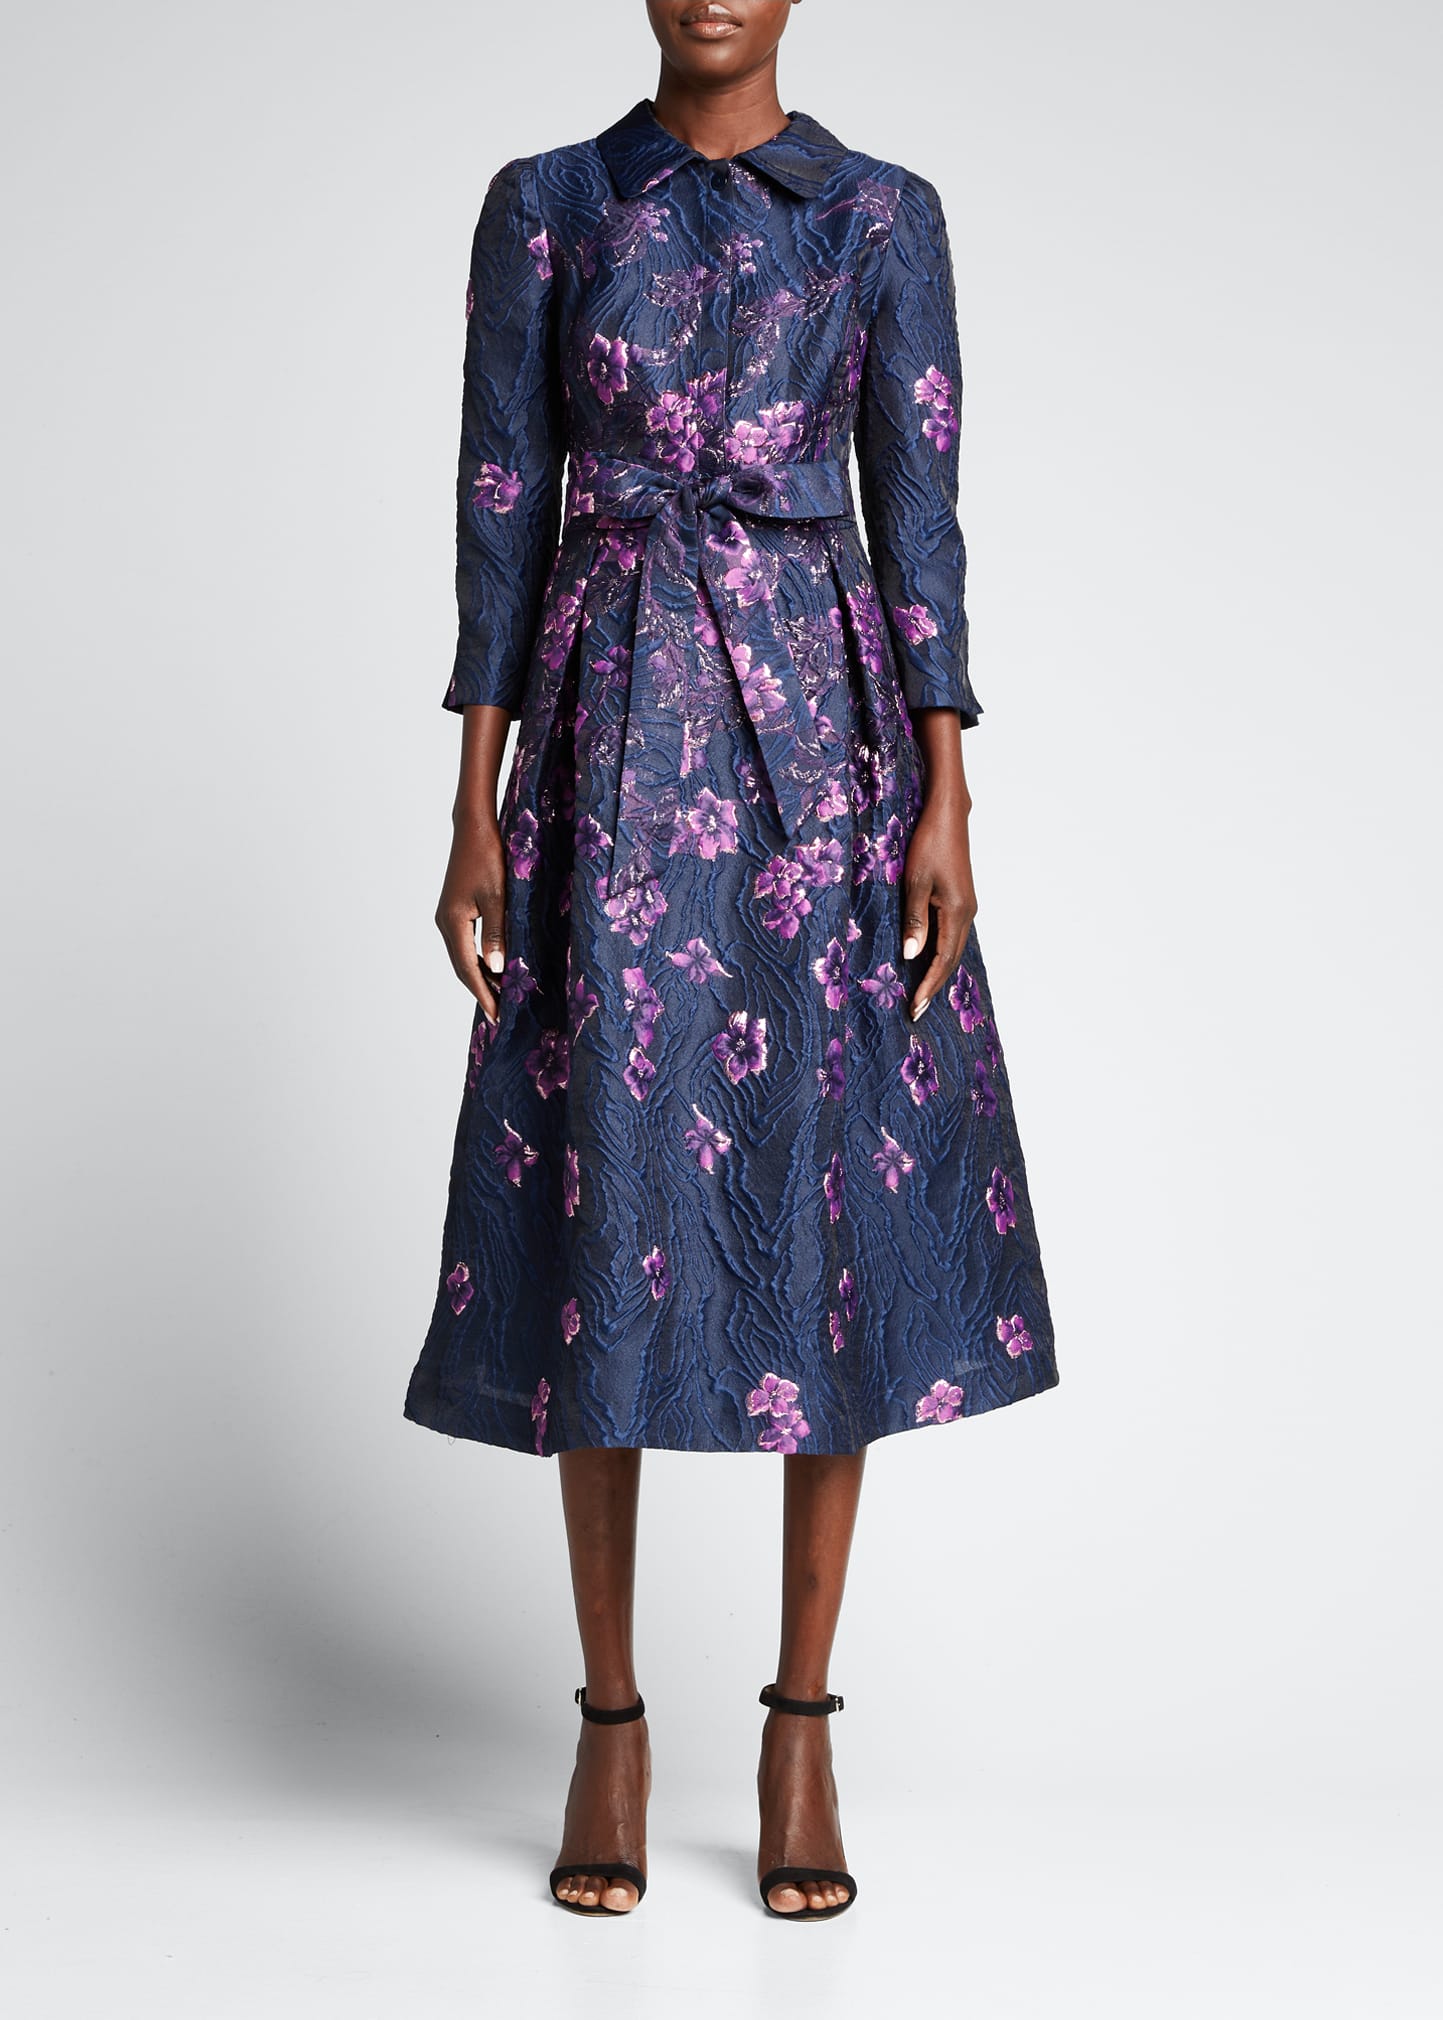 Rickie Freeman for Teri Jon High-Low Floral Embroidered Tulle Dress ...